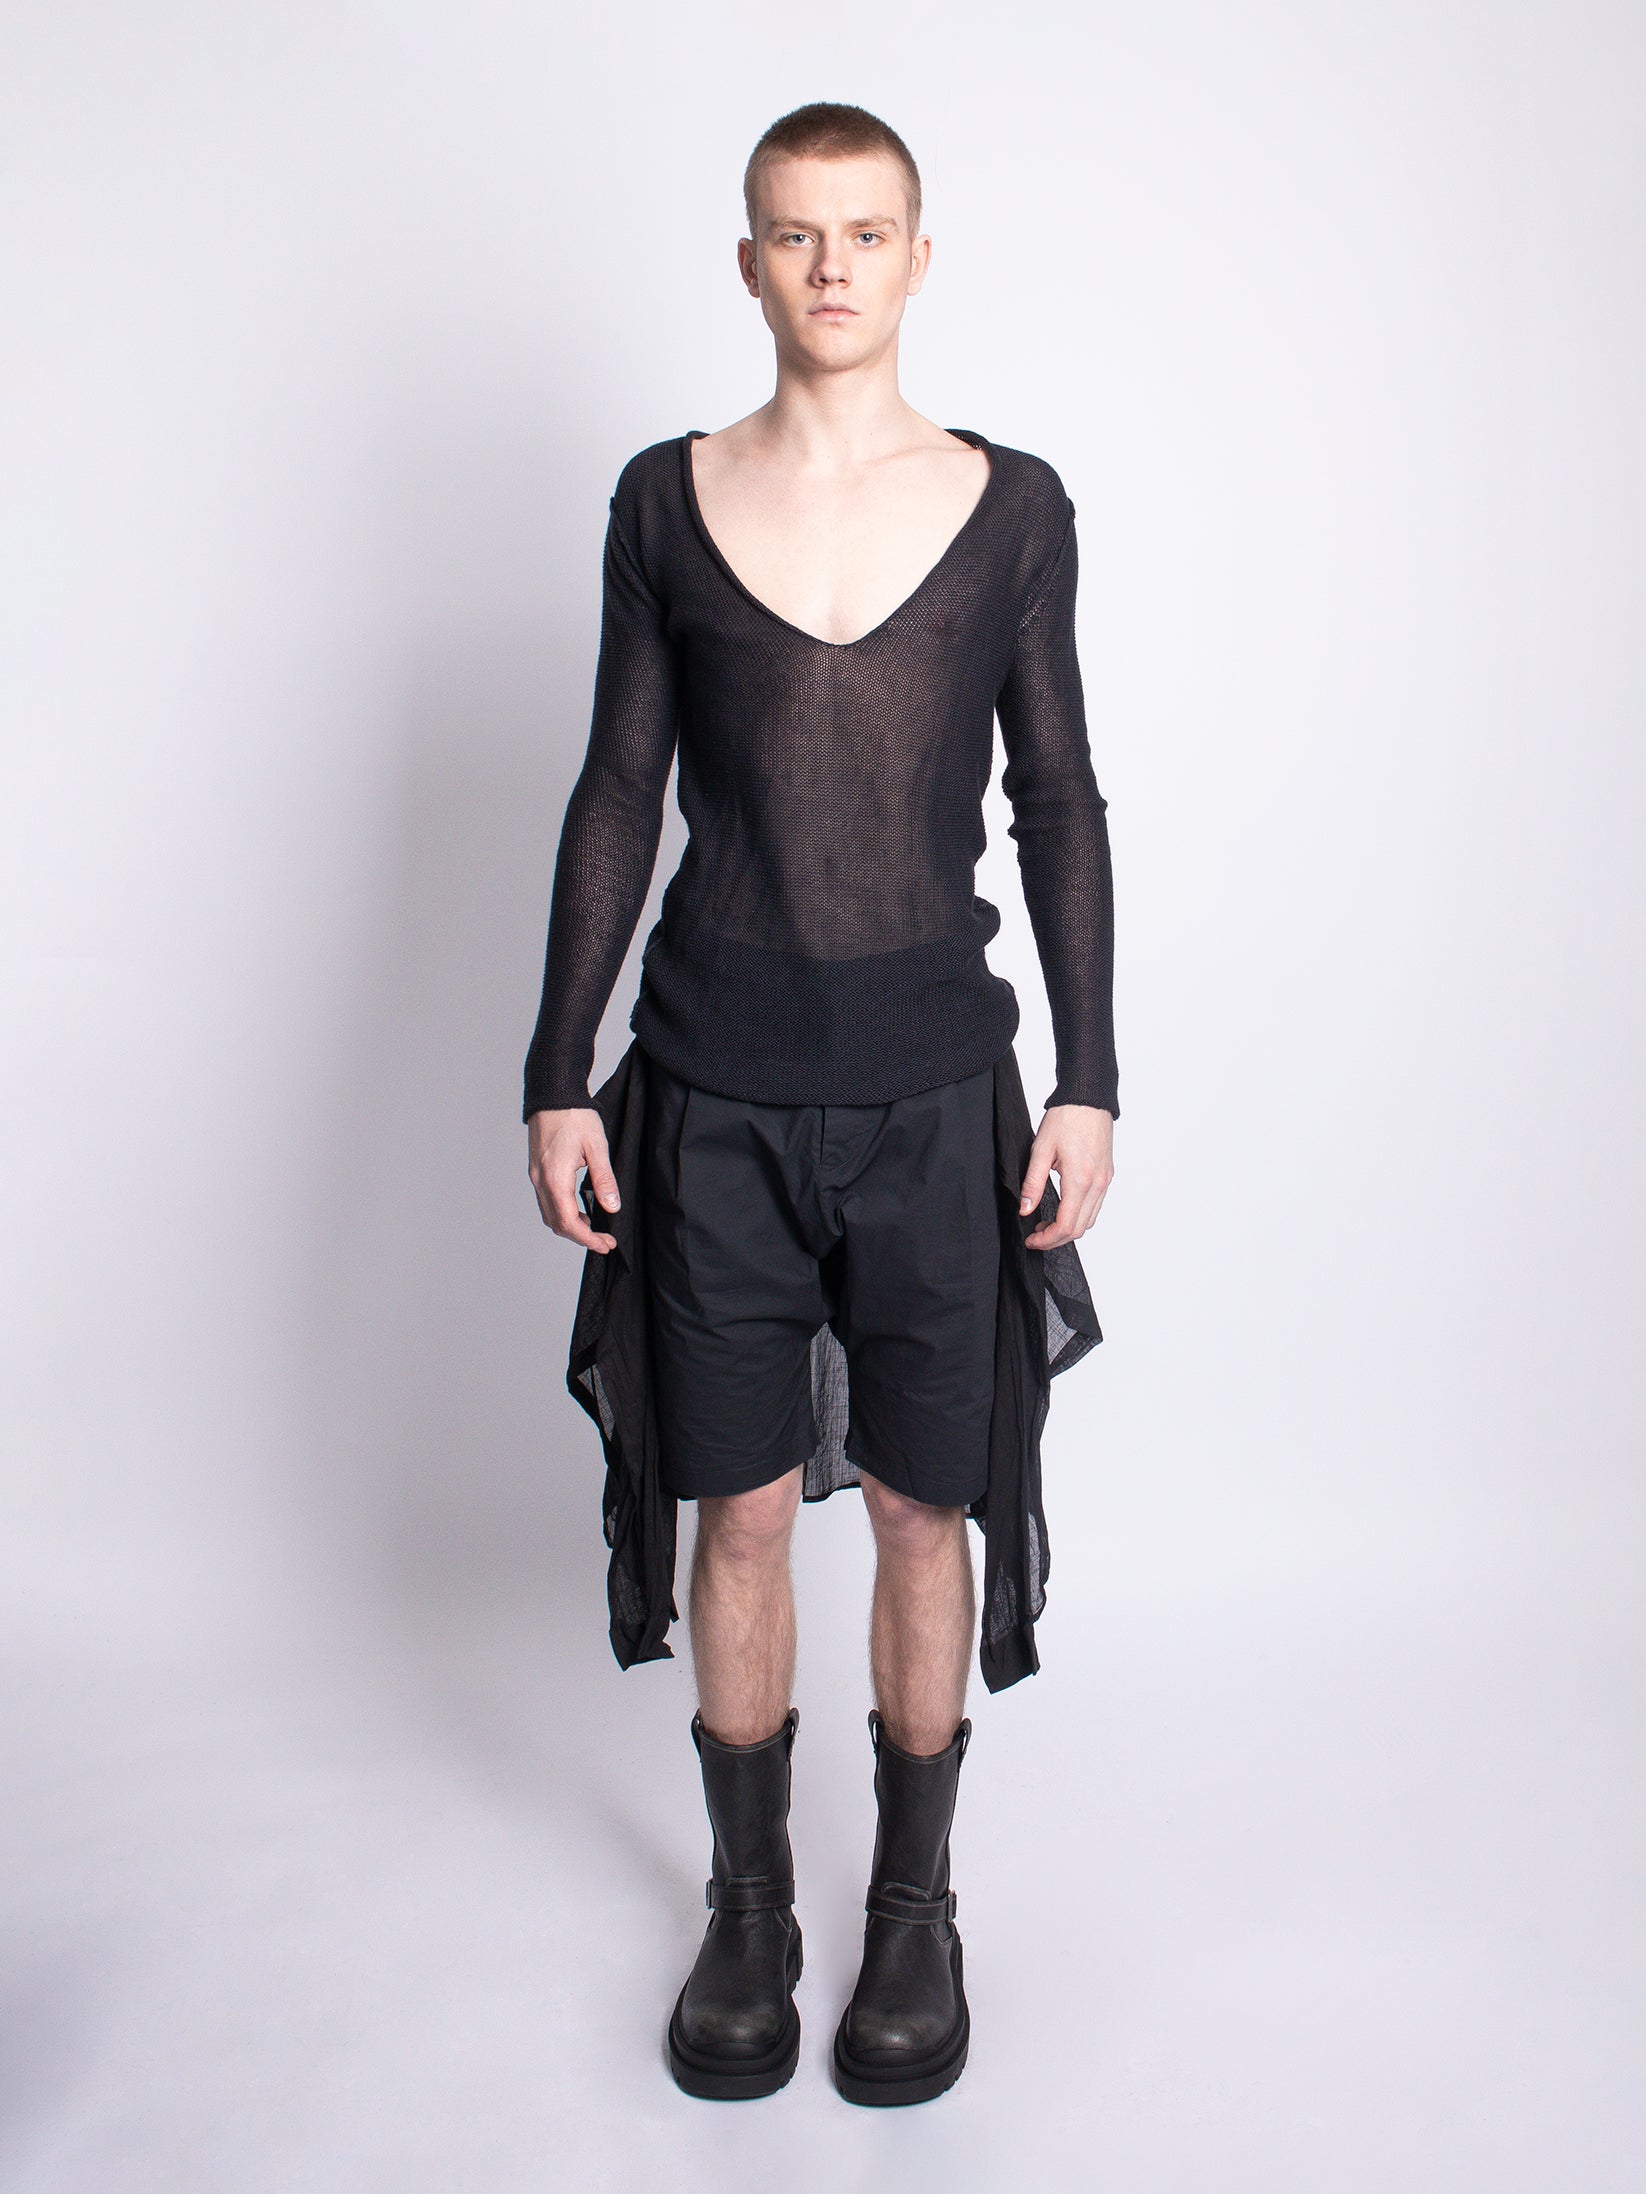 Black Cotton Shorts With Tie-Up Sleeves